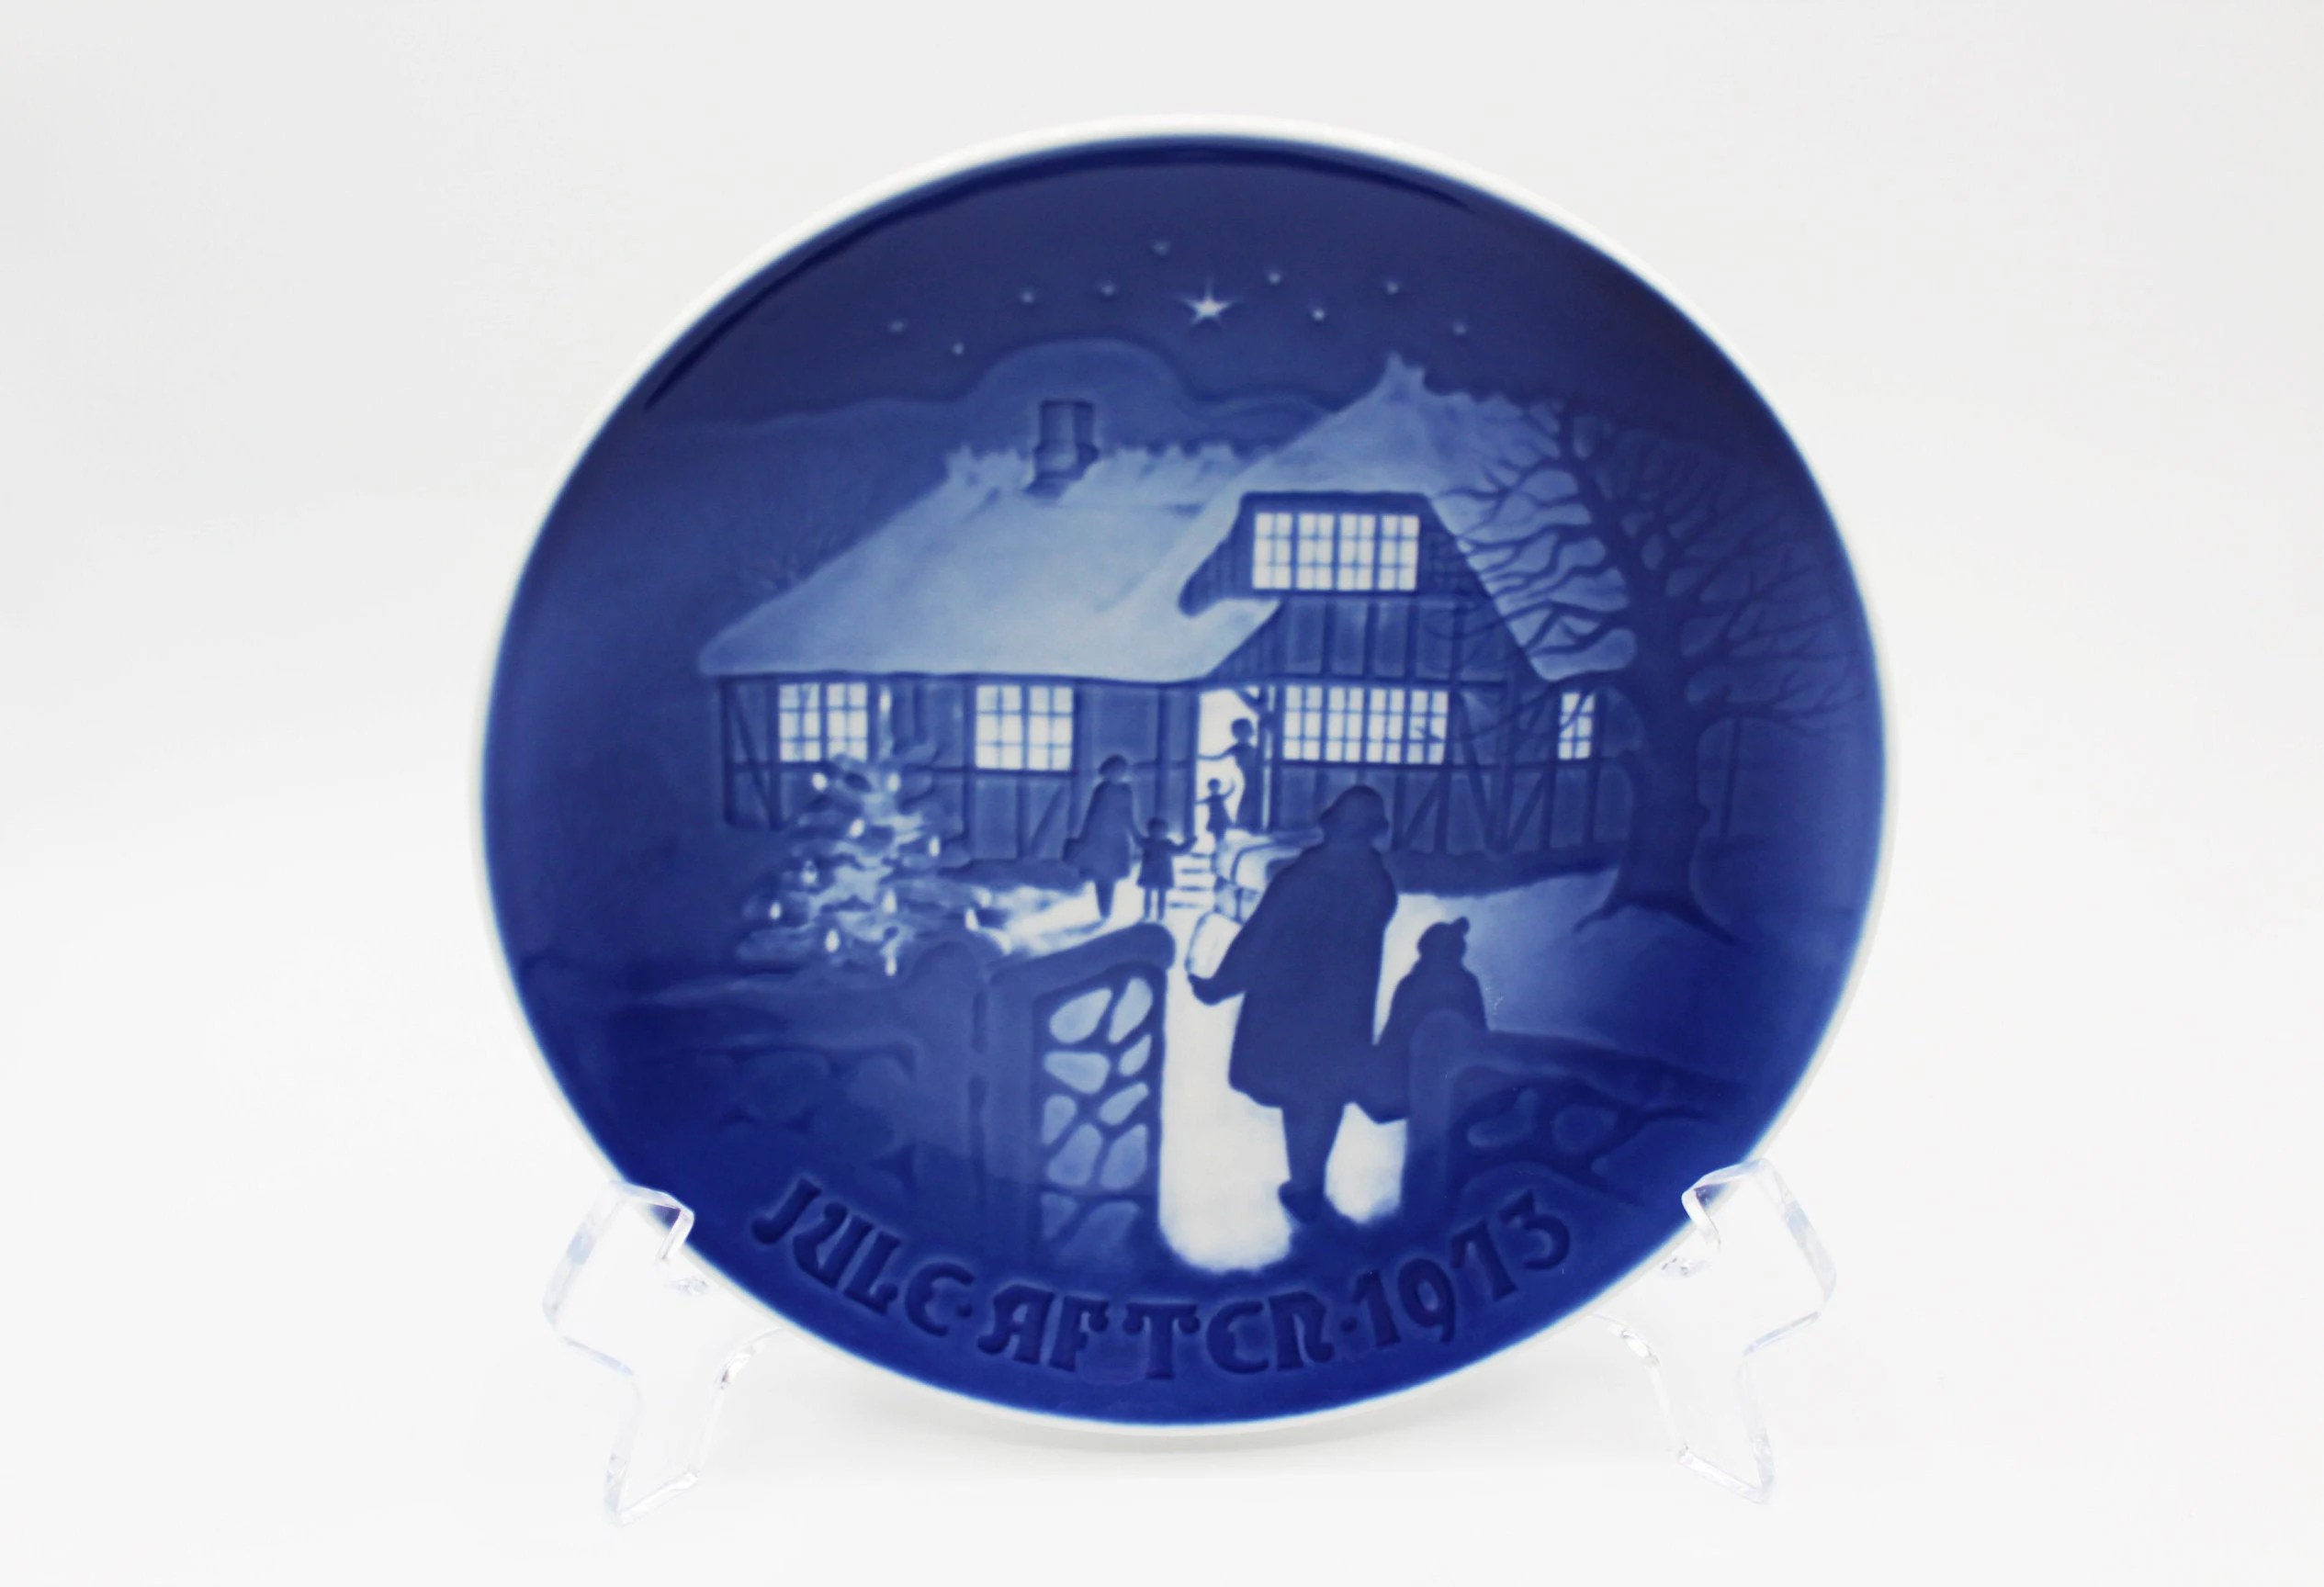 1973 B&G – Bing and Grondahl – Country Christmas – Blue and White Decorative Collectors Plate – Denmark at Whispering City RVA